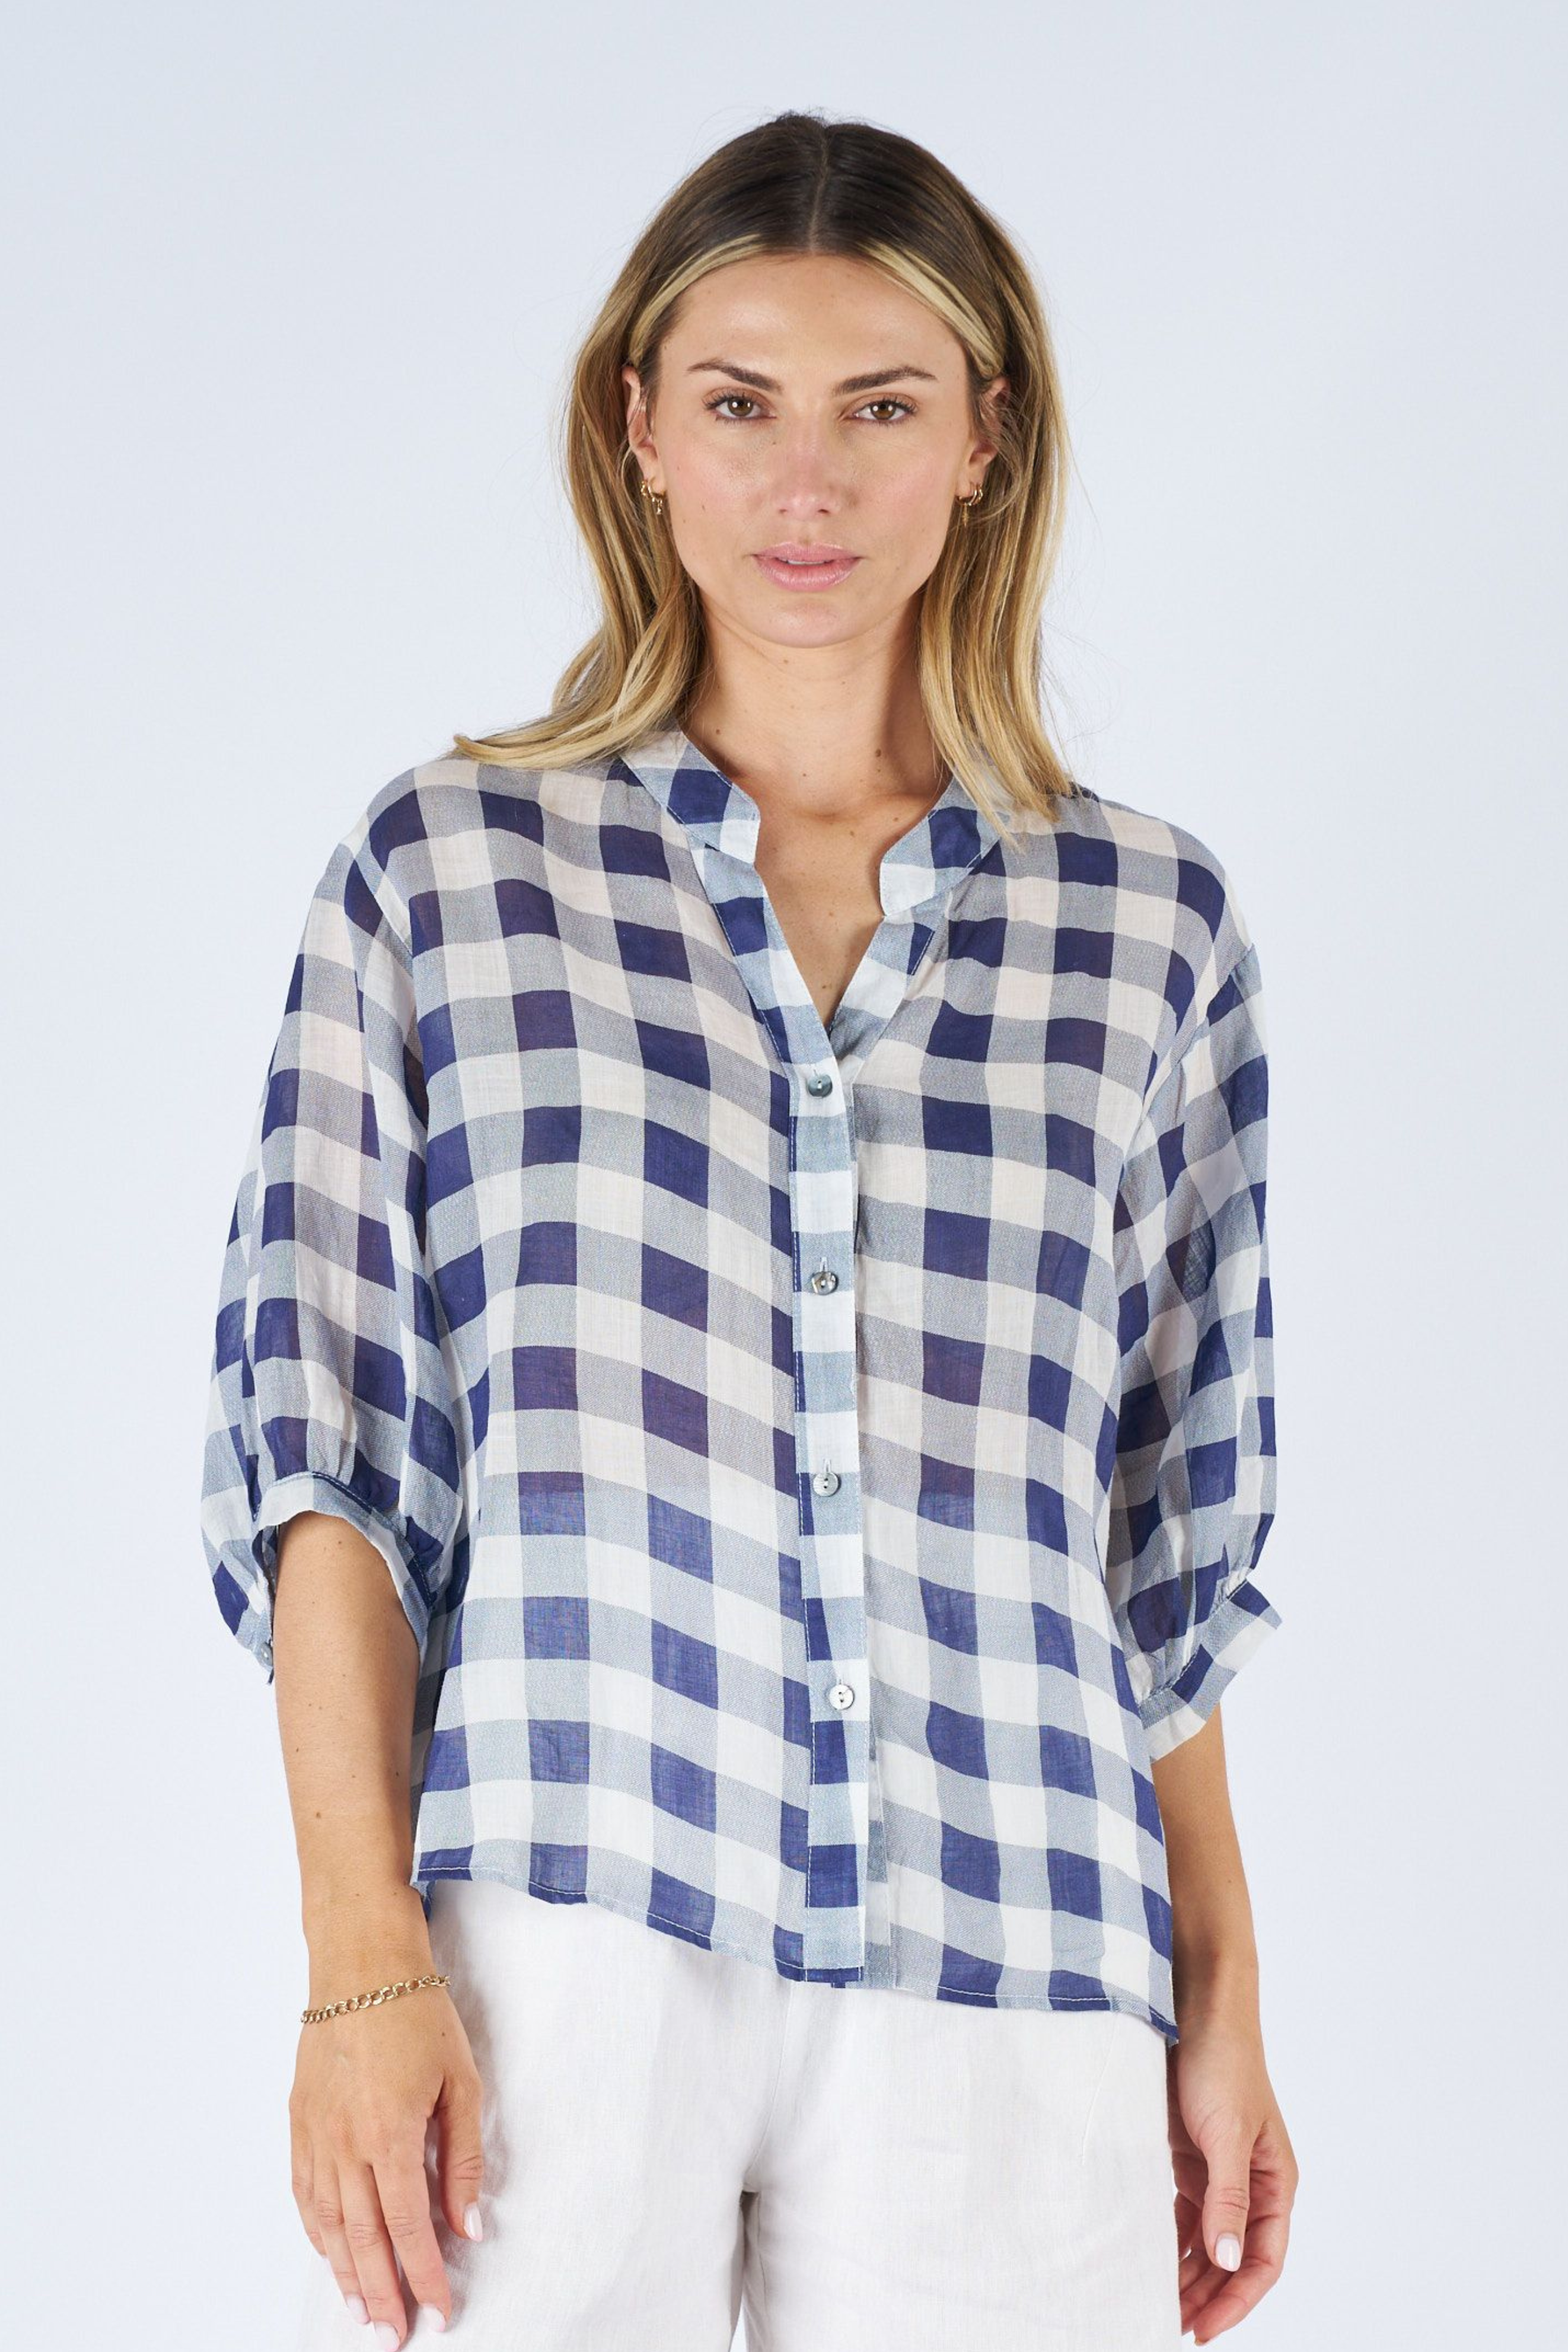 CHARLIE Top in Navy and White Check